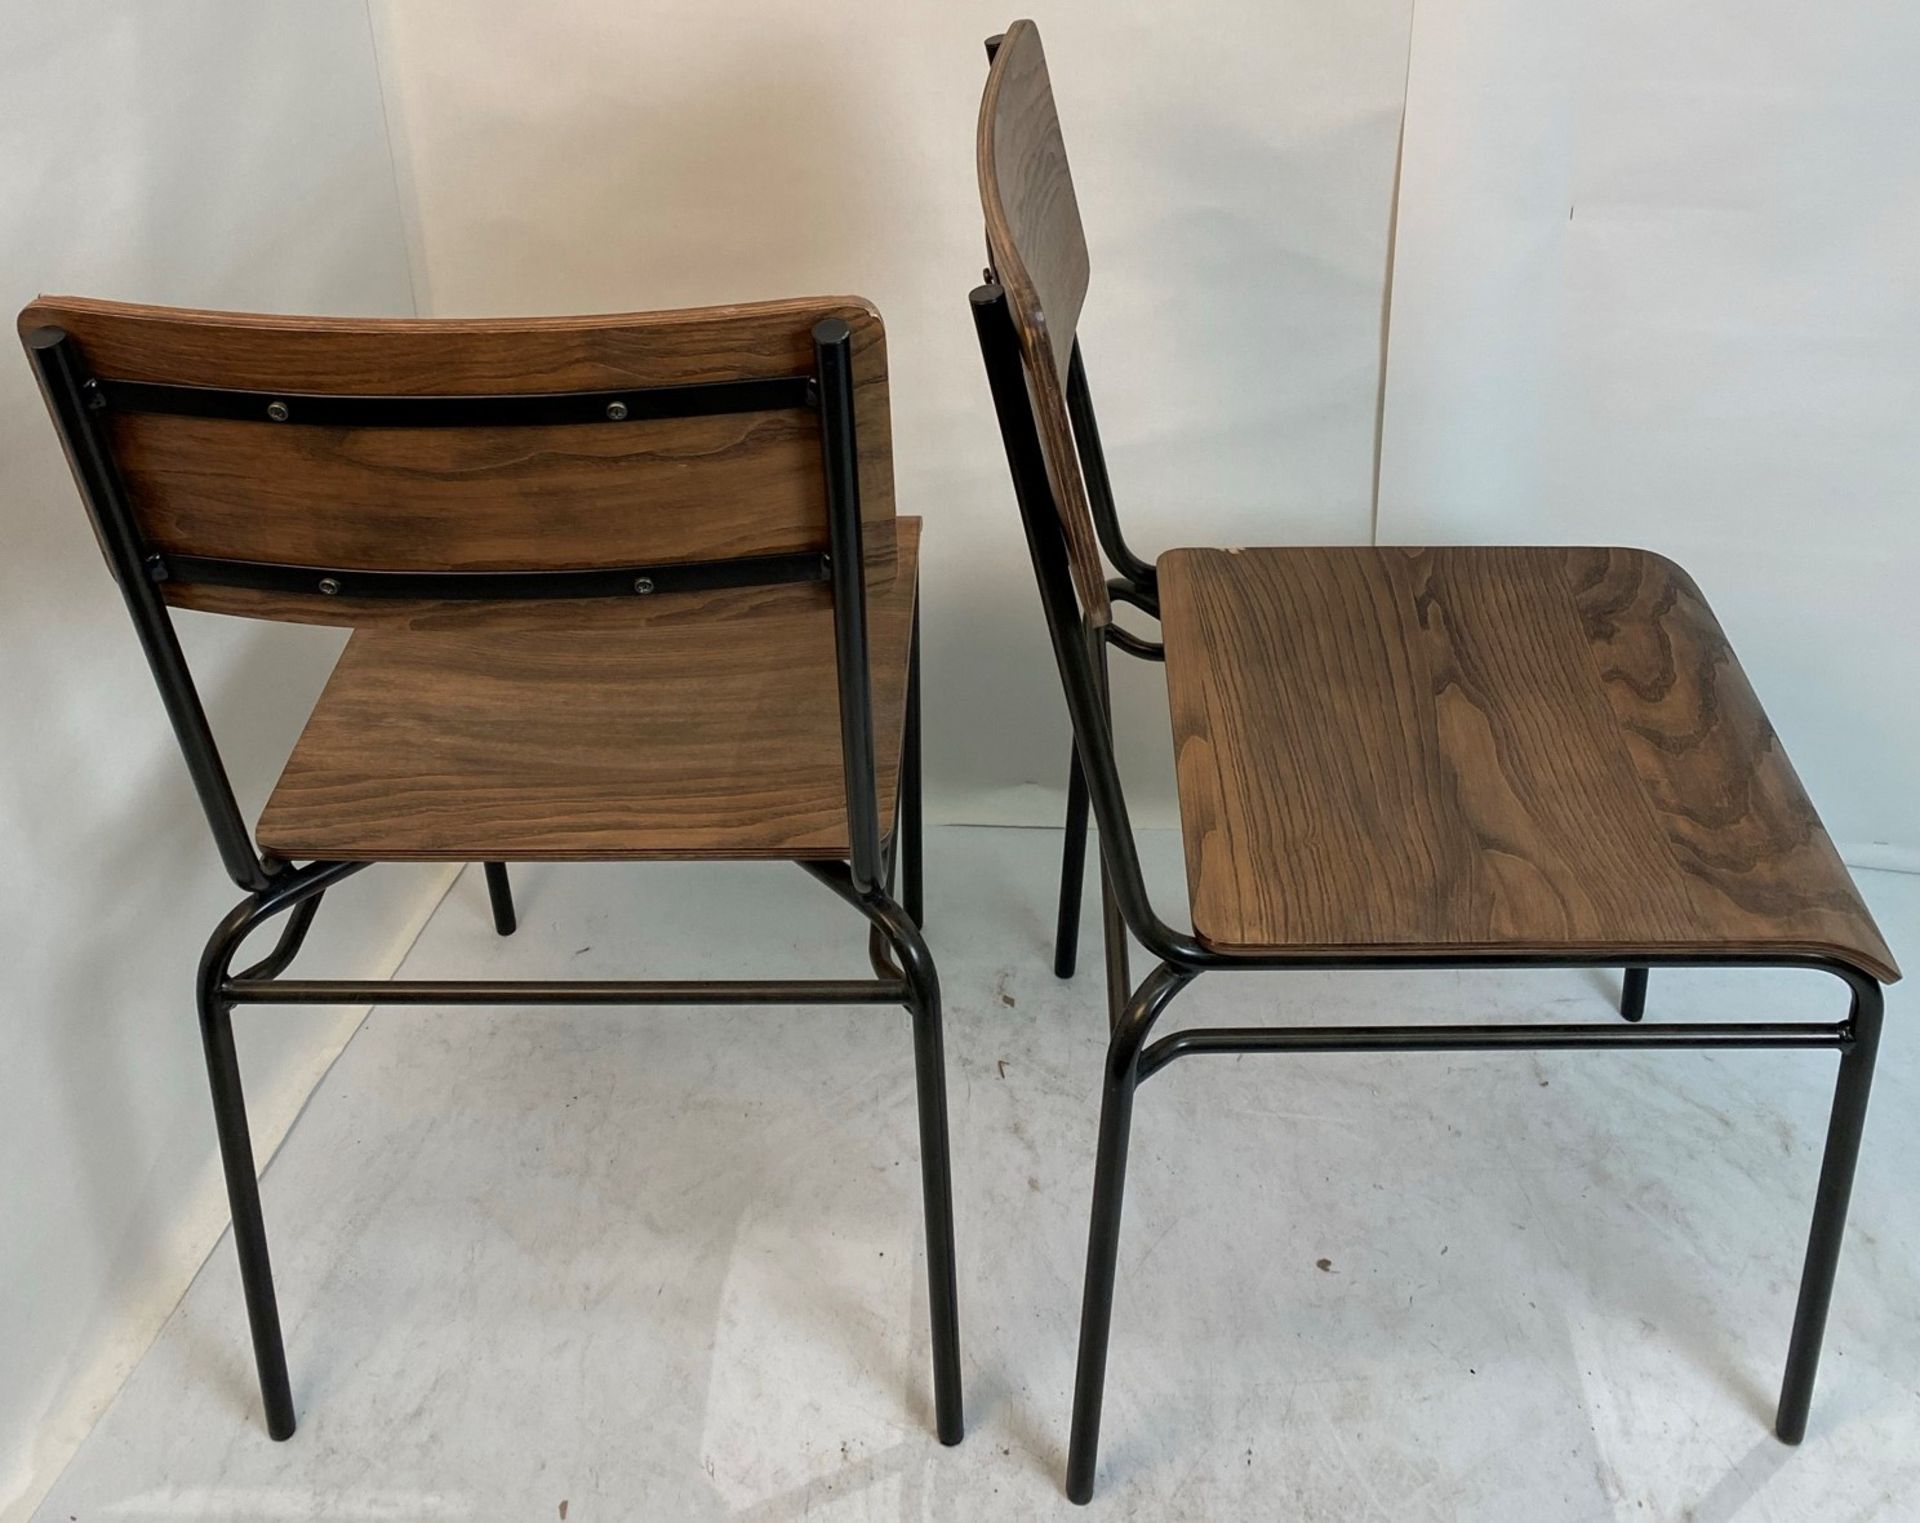 2 x Dark wood effect stacking chairs with black metal frames - Pleae note slight chip to rear right - Image 3 of 4